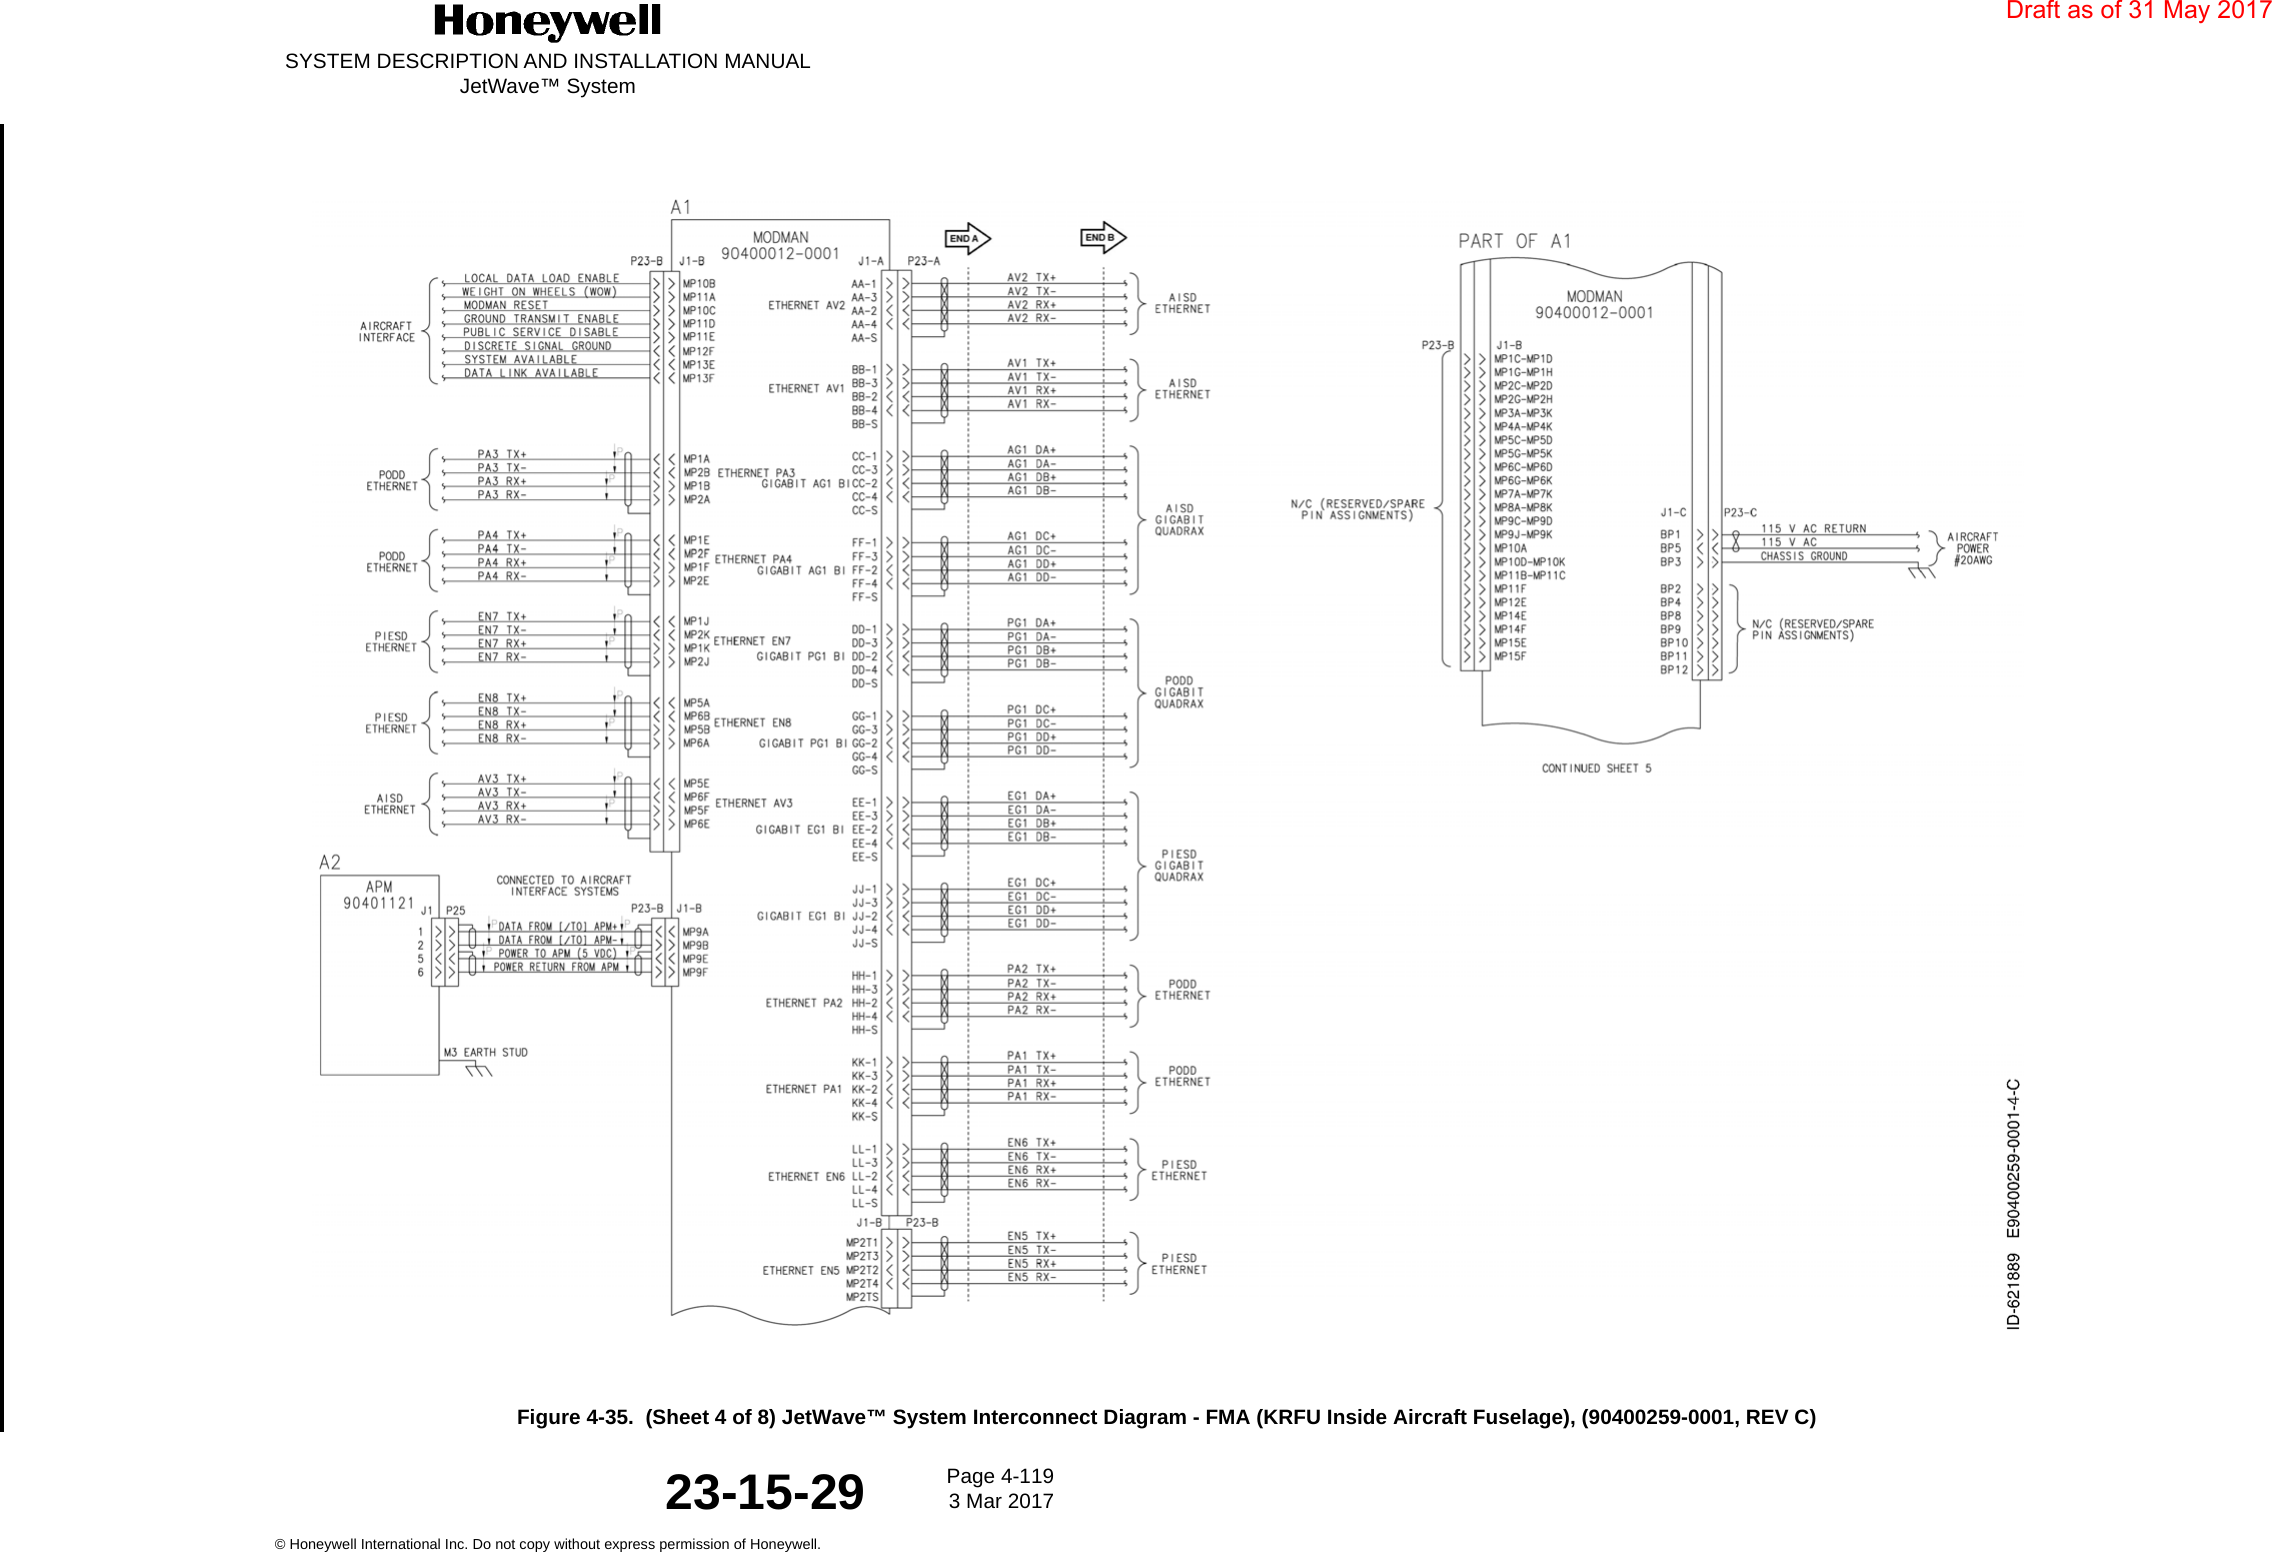 SYSTEM DESCRIPTION AND INSTALLATION MANUALJetWave™ SystemPage 4-119 3 Mar 2017© Honeywell International Inc. Do not copy without express permission of Honeywell.23-15-29Figure 4-35.  (Sheet 4 of 8) JetWave™ System Interconnect Diagram - FMA (KRFU Inside Aircraft Fuselage), (90400259-0001, REV C)Draft as of 31 May 2017